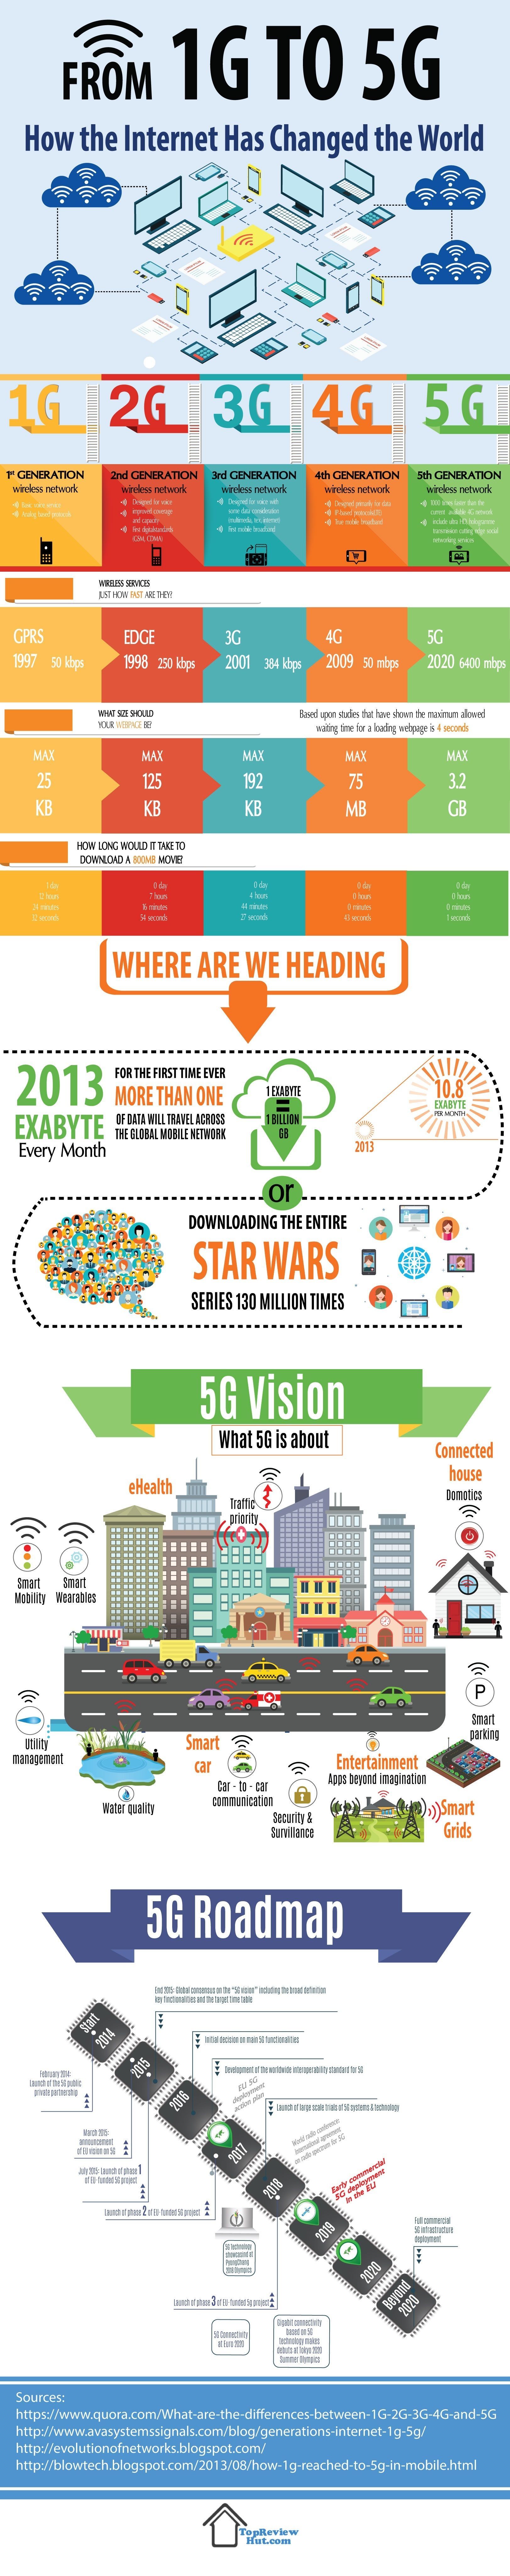 From 1G To 5G How The Internet Has Changed The World - Infographic - TopReviewHut